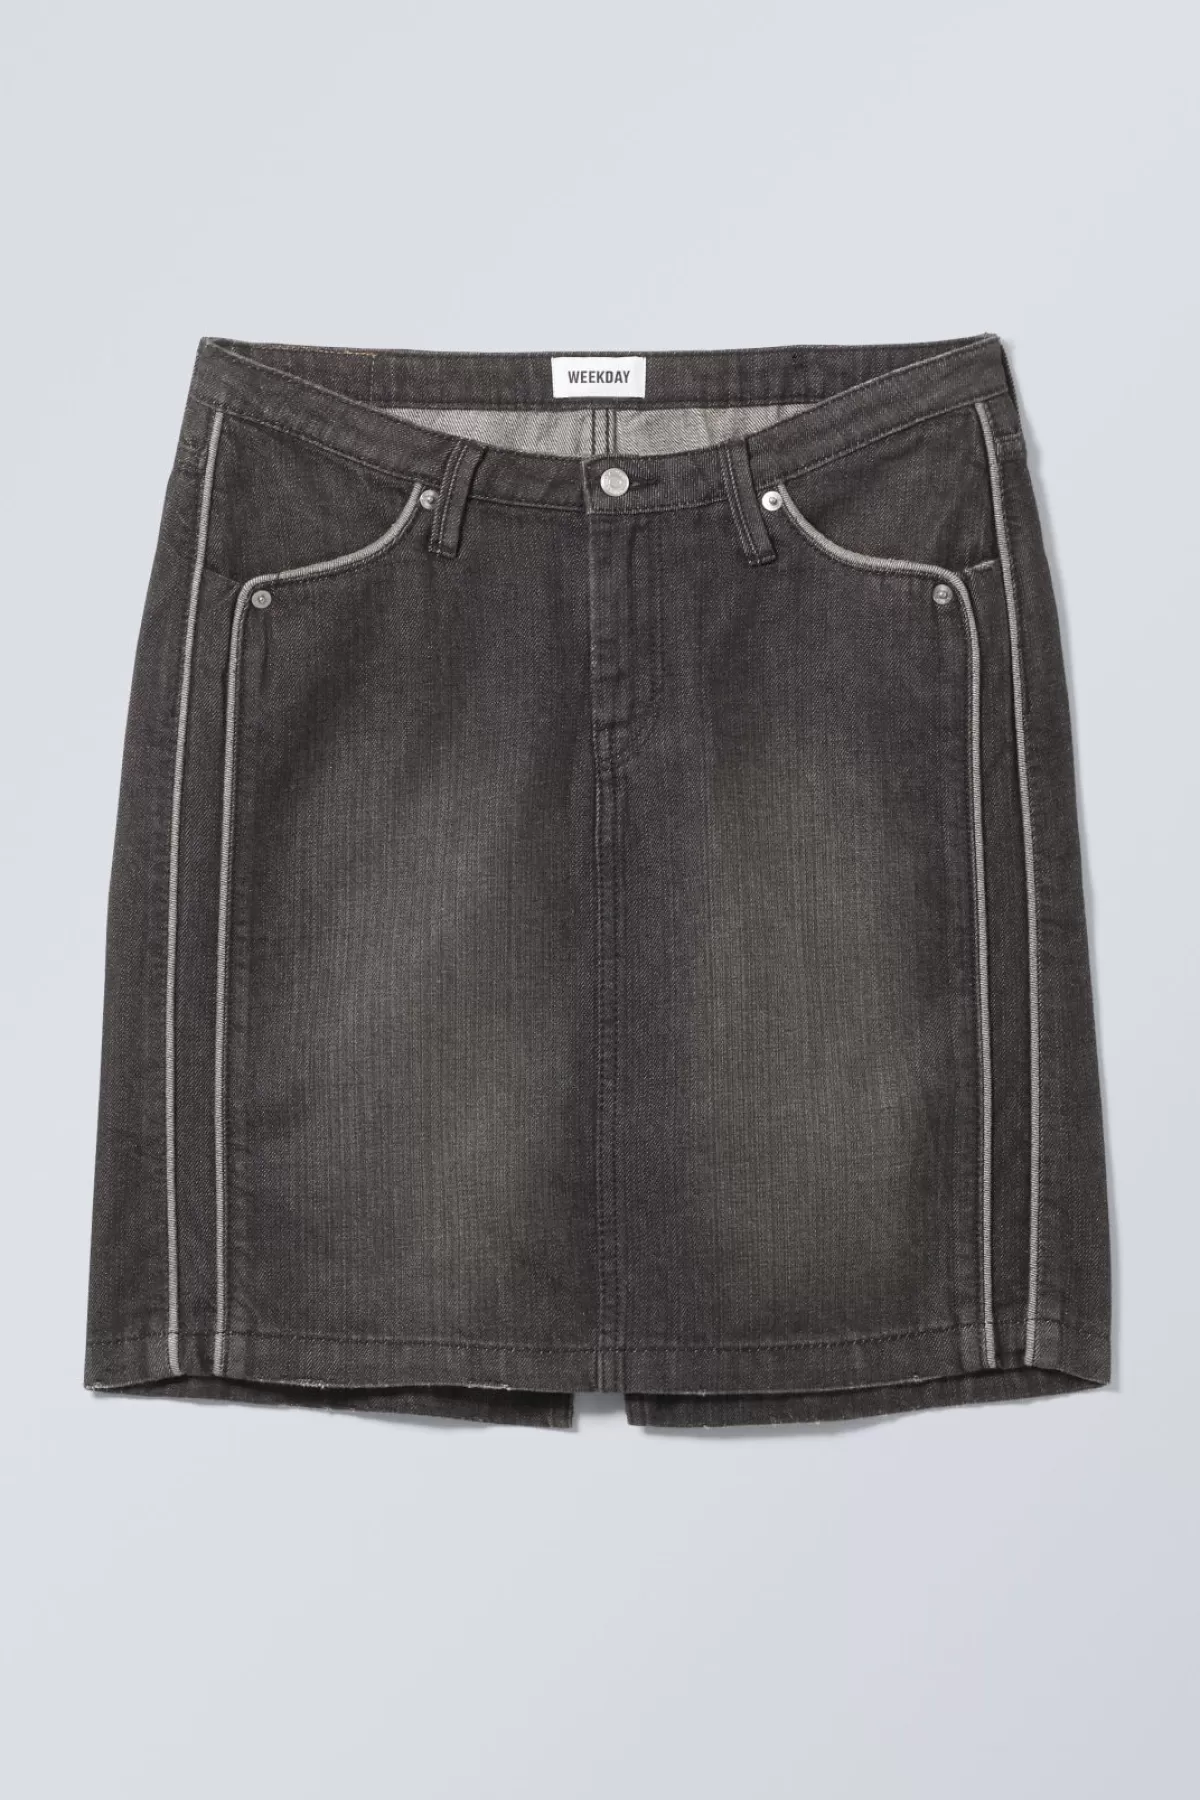 Weekday Piped Knee Length Denim Skirt Dirty Ash Clearance